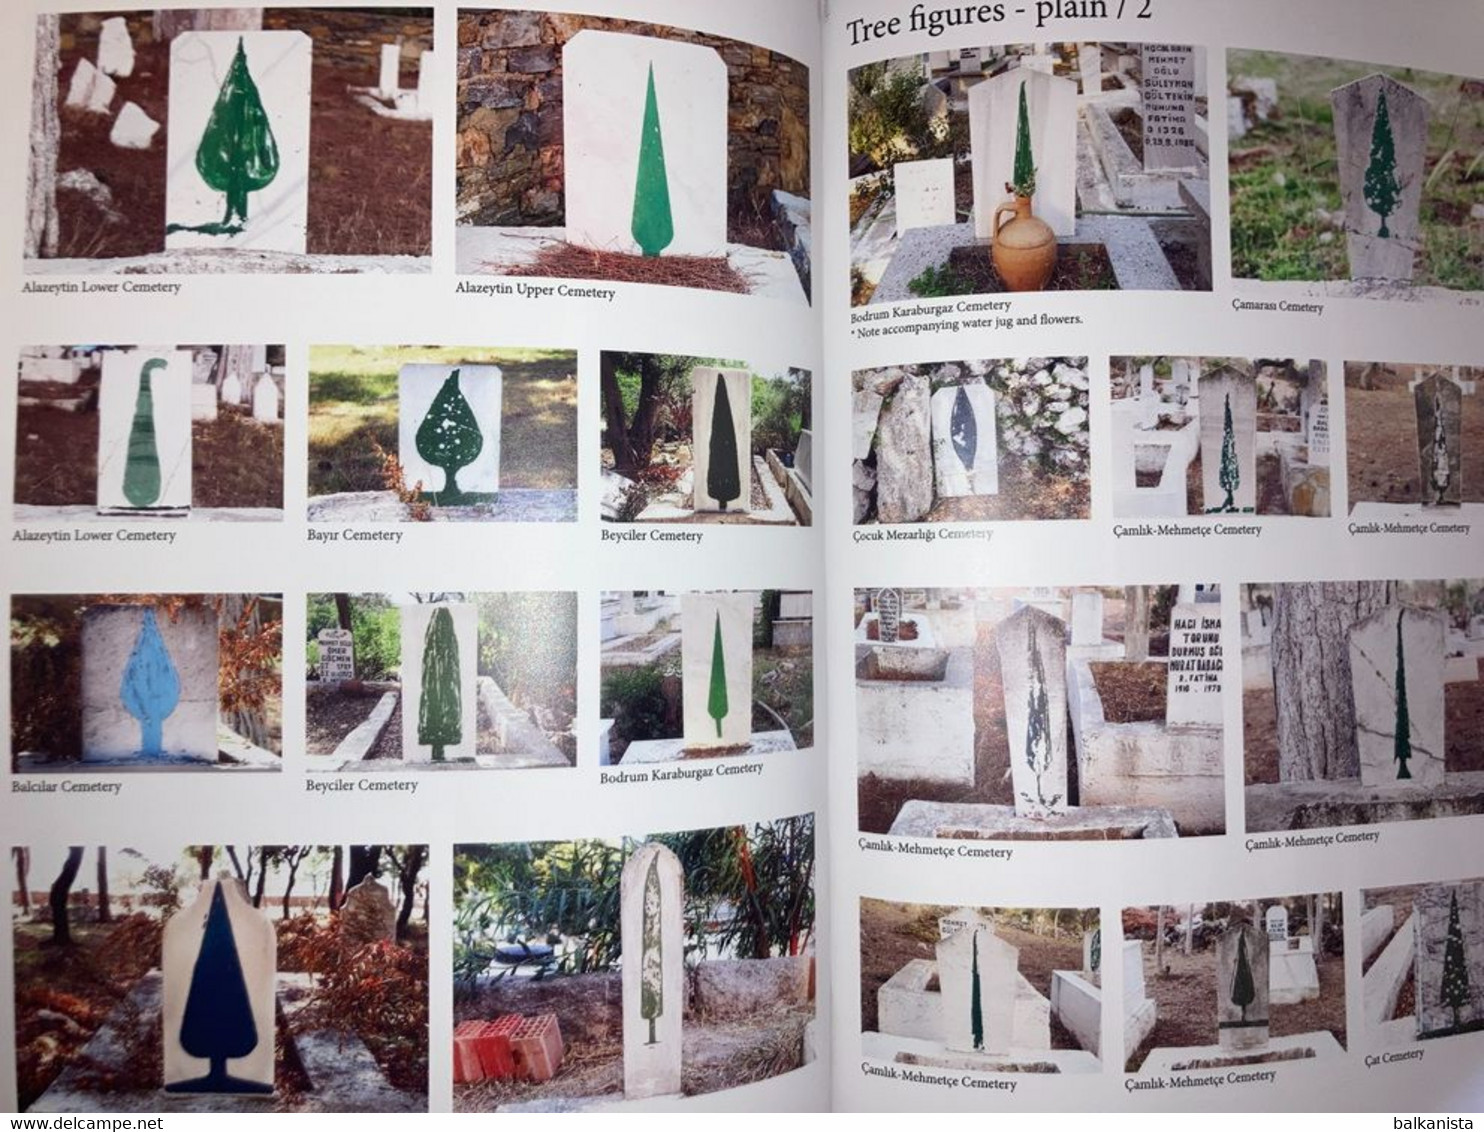 Forests Of The Afterlife Folk Art And Symbolism In Village Cemeteries Of Turkey - Antike